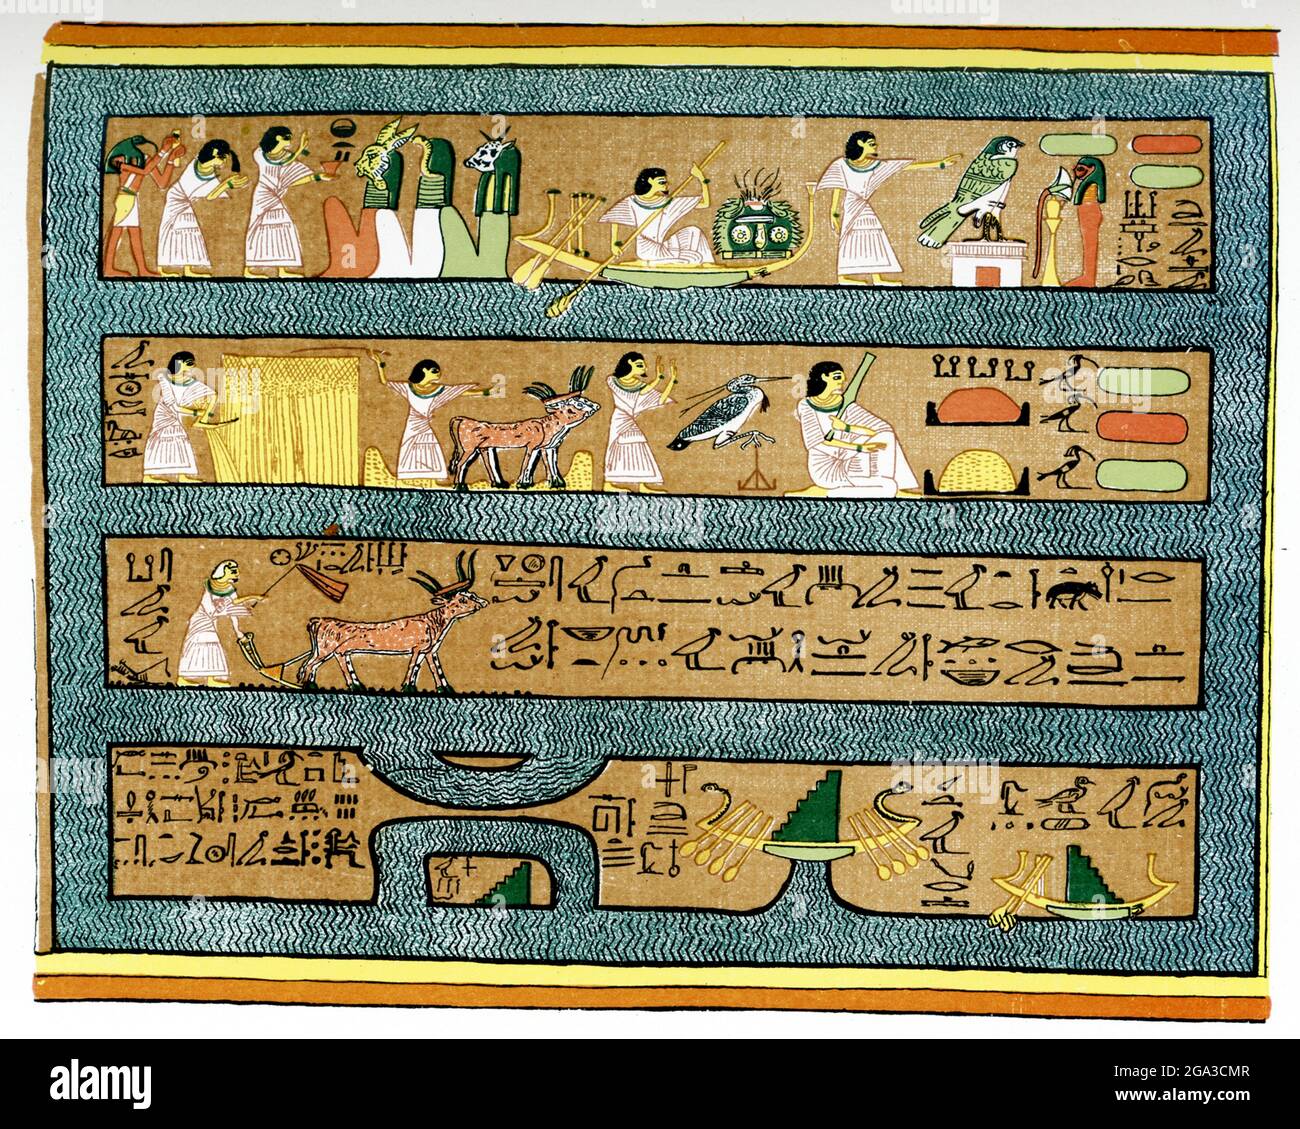 Occupations of Ani in Elysian Fields. This scene is taken from the Papyrus of Ani, a copy of the Egyptian Book of the Dead that dates to the 19th Dynasty. It shows Ani worshiping. The god Thoth introduces Ani into the presence of three gods. Ani worships the sun god Re before two altars and carries lotus flowers. It also shows him plowing and reaping in the Fields of the Dead, through which water flows. Stock Photo